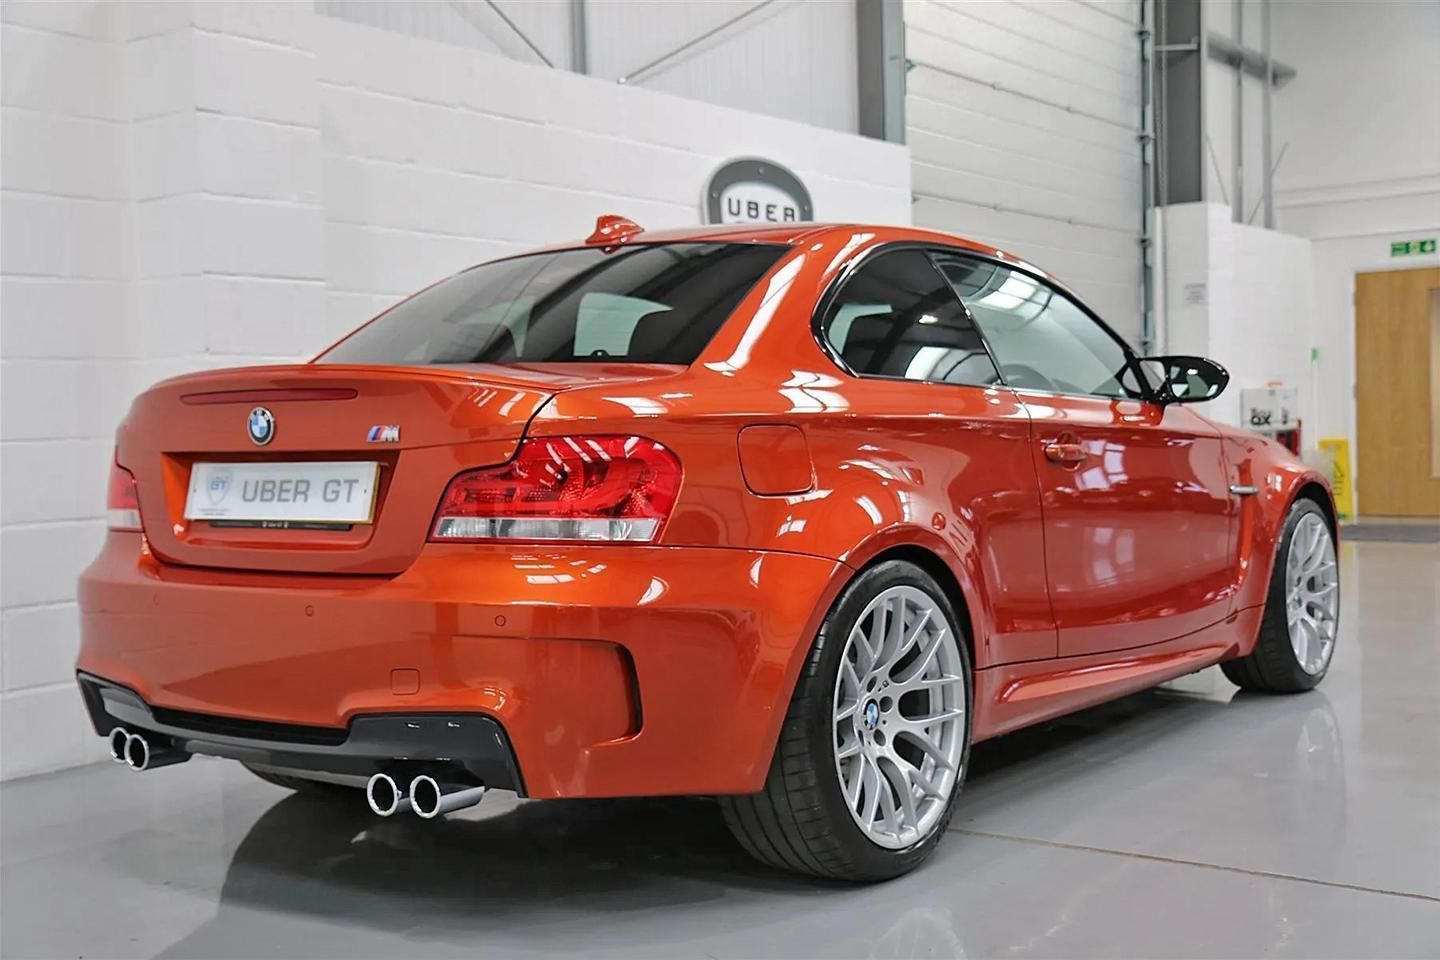 A BMW M3 E46 Just Sold For $90,000, Will This Become The New Normal?